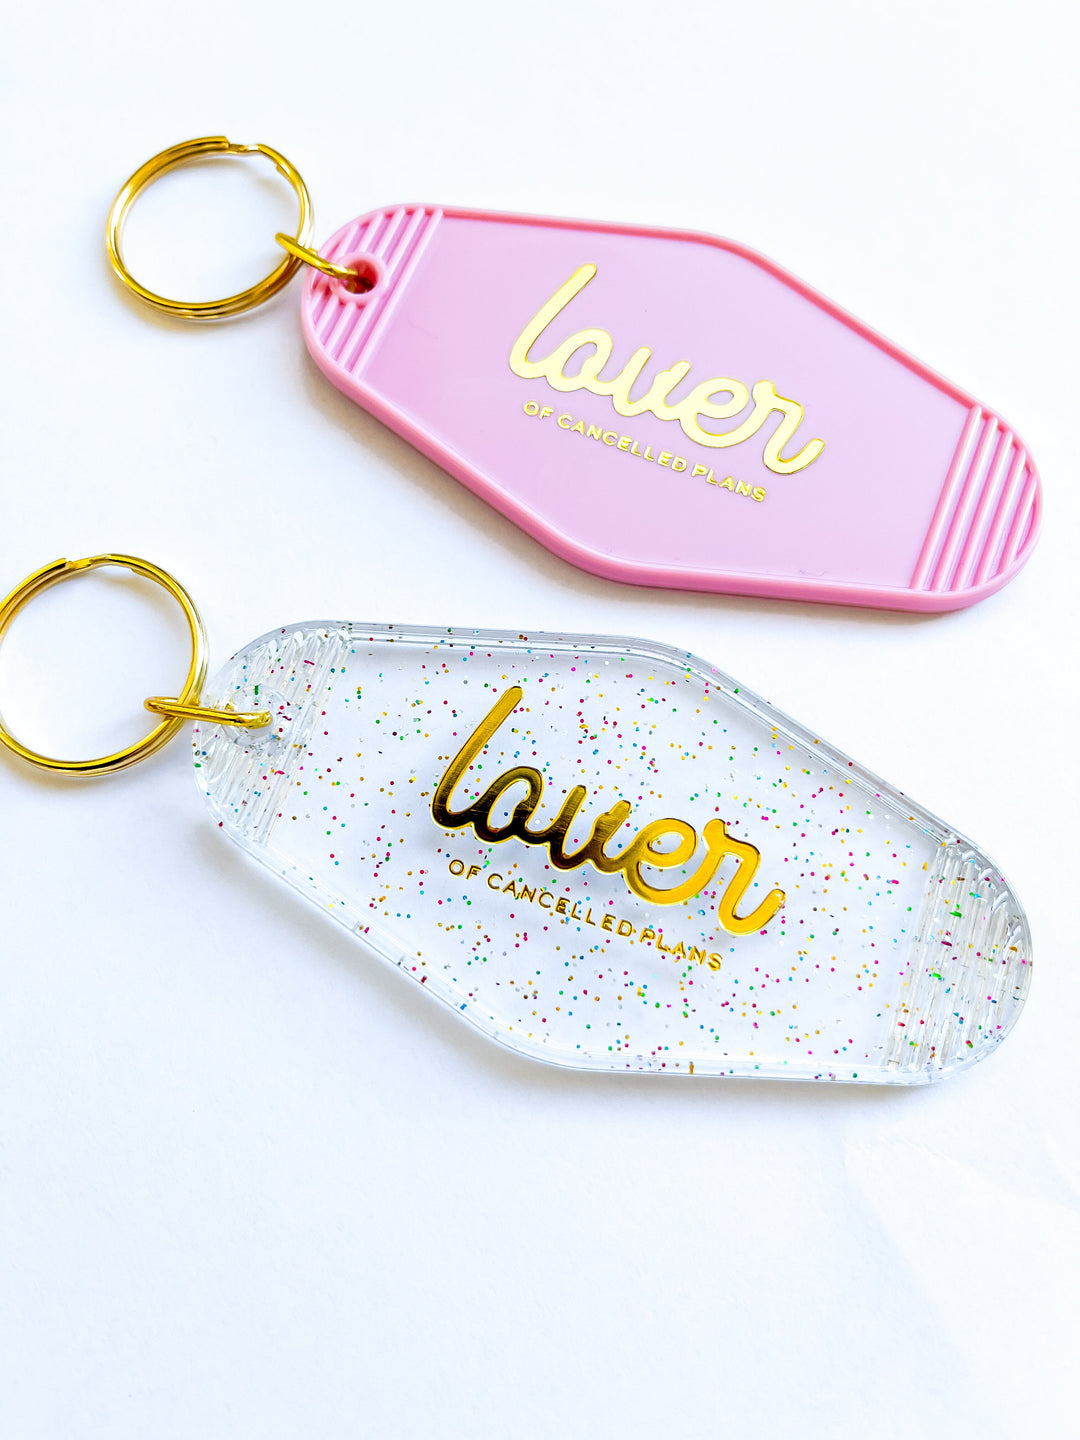 Lover of Cancelled Plans Keychain